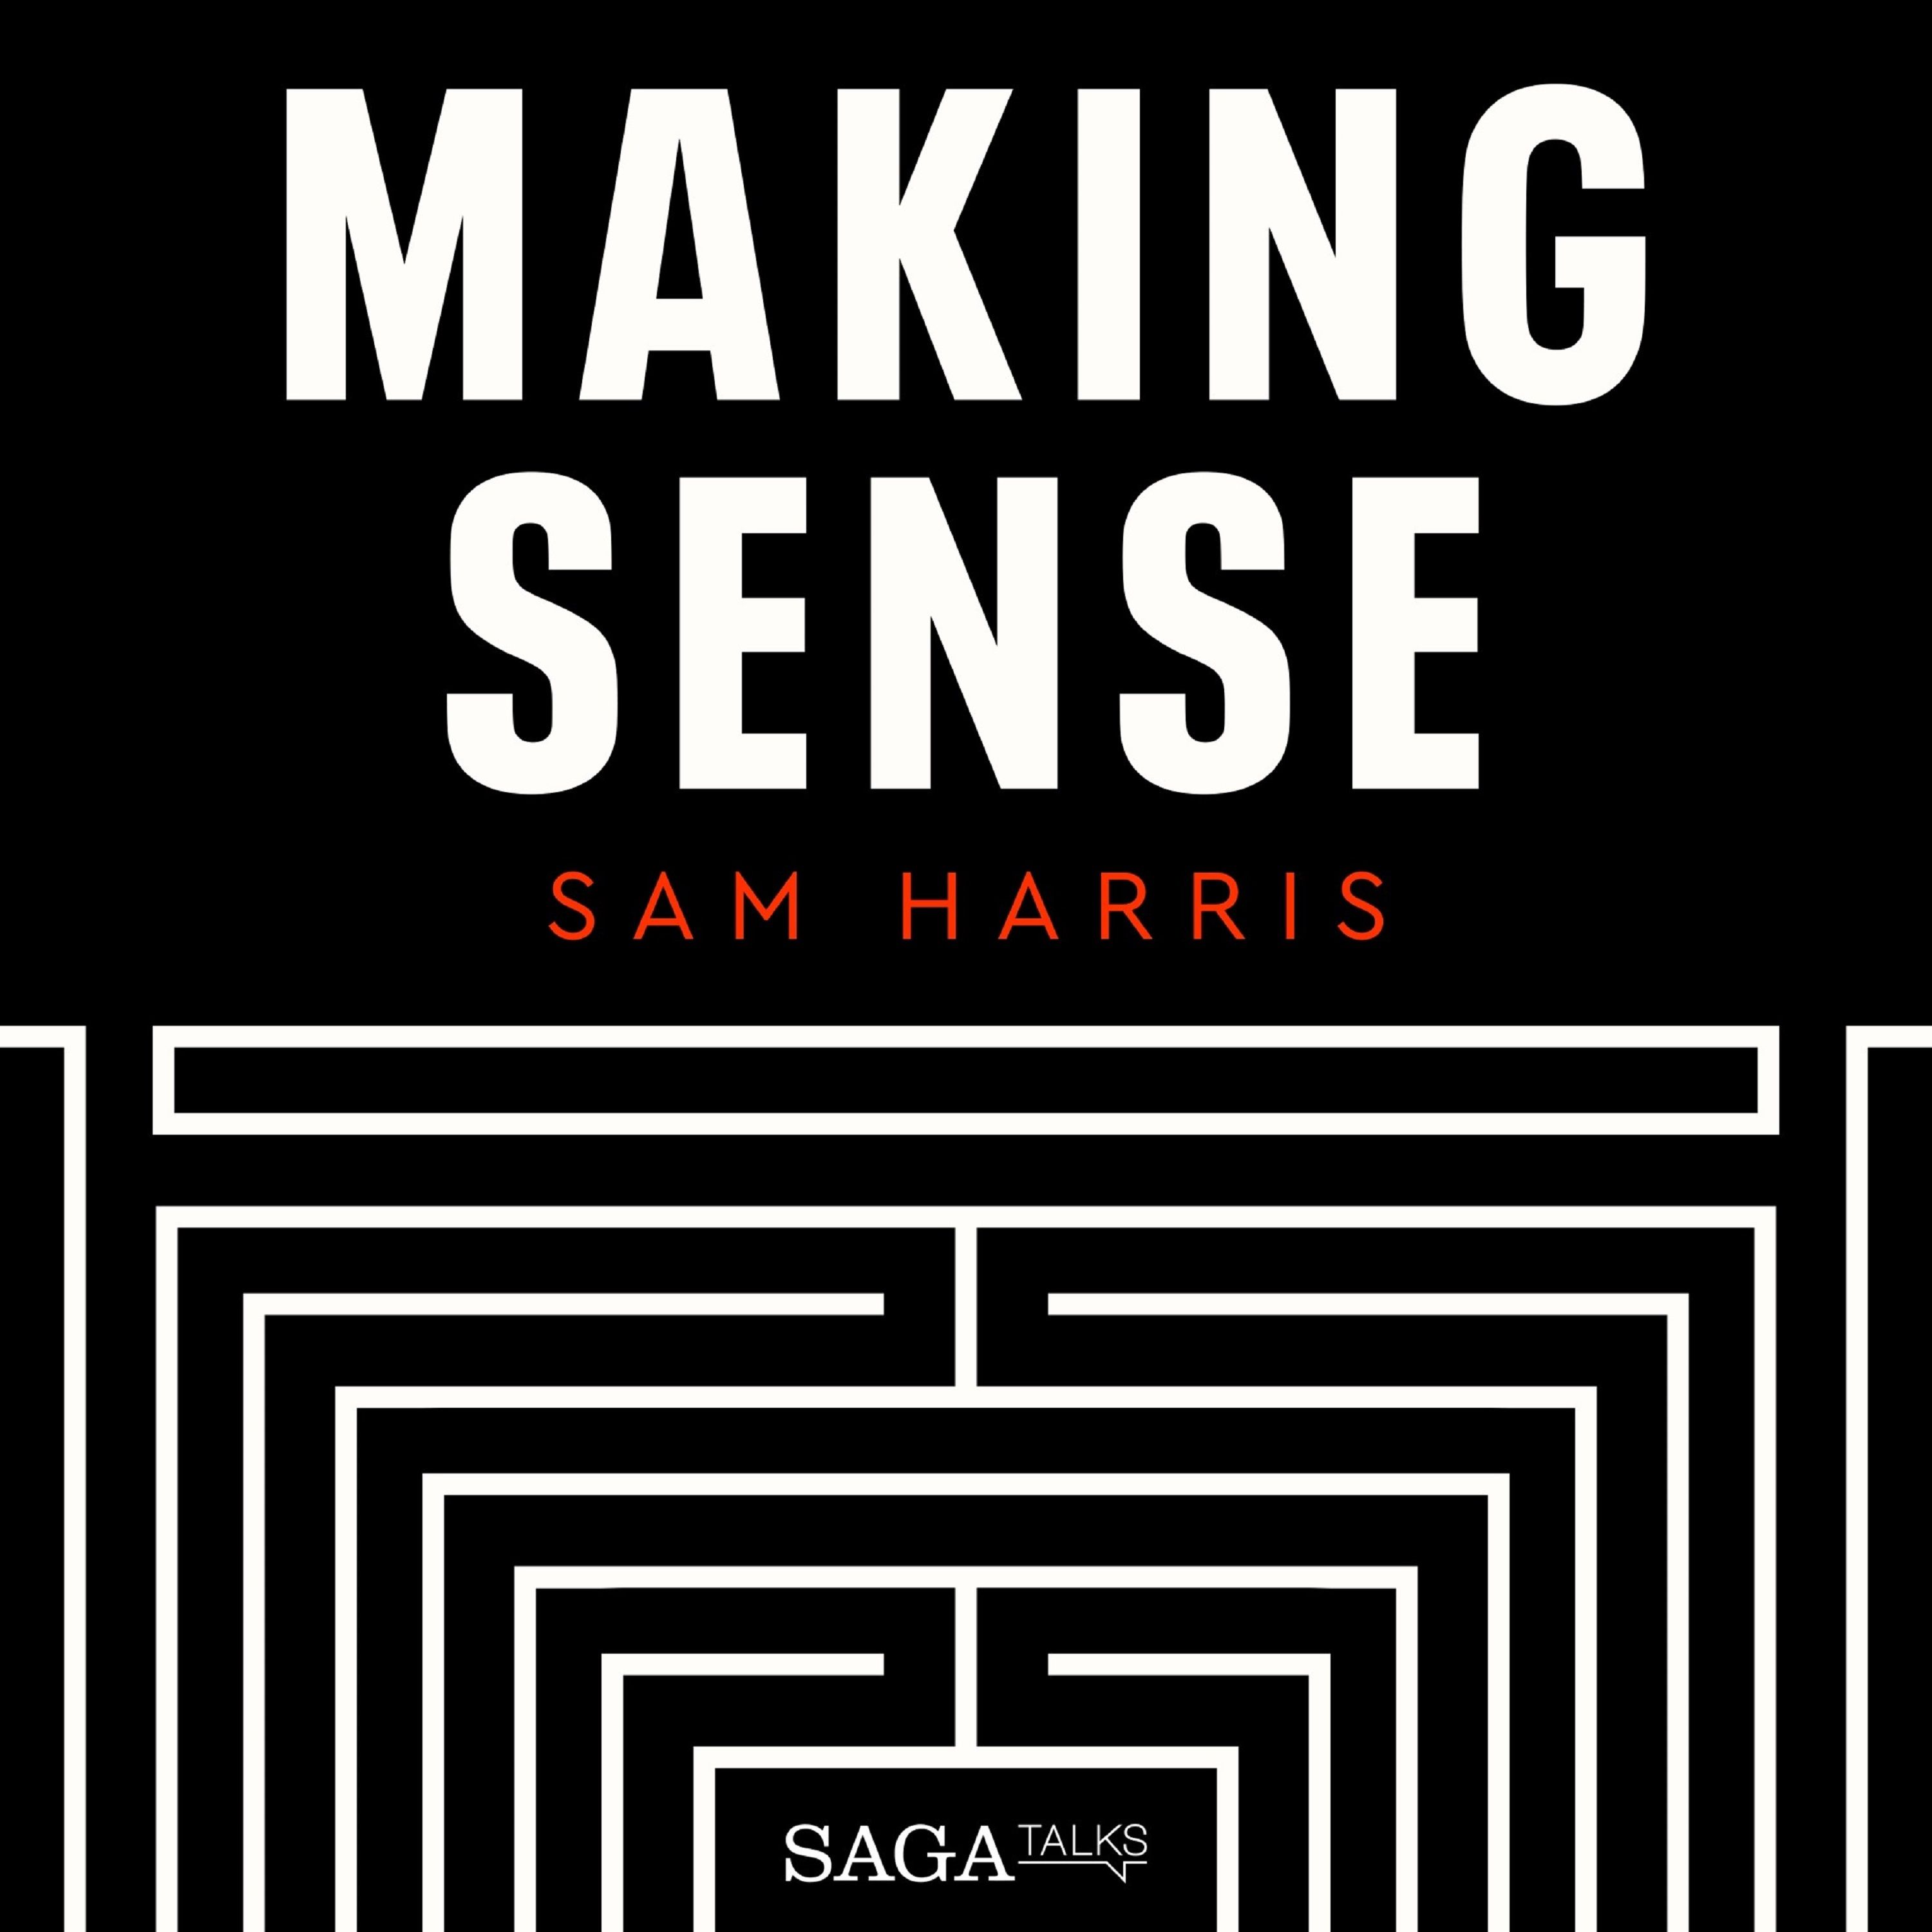 From Cells to Cities, audiobook by Sam Harris